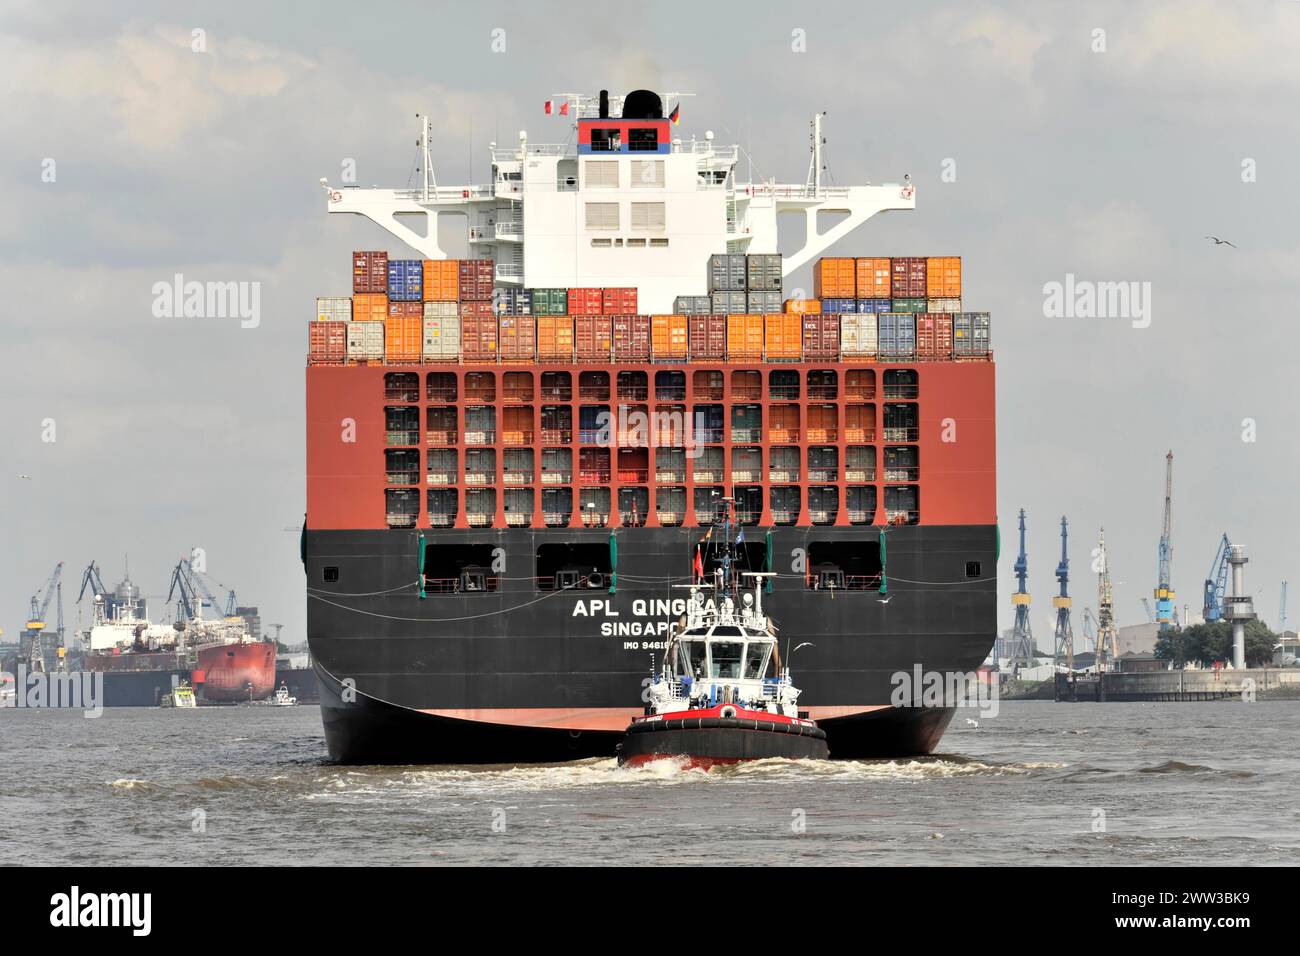 APL QINGDAO, stern of a large container ship on the Elbe, supported by a tugboat, Hamburg, Hanseatic City, Germany Stock Photo